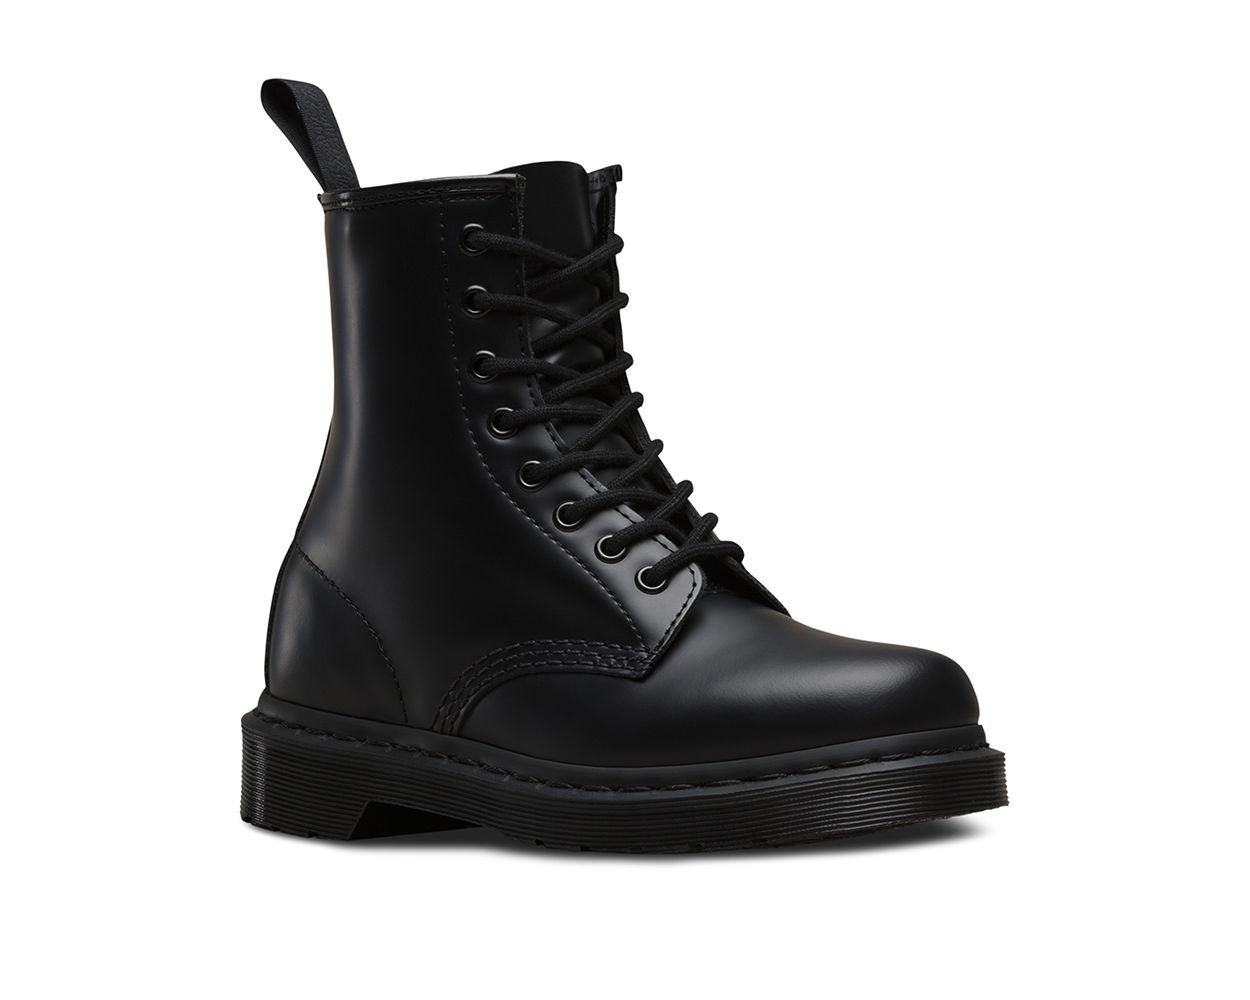 East Timor Generosity Knead Dr. Martens 1460 Mono Smooth Leather Lace Up Boots in Black Smooth | NEON